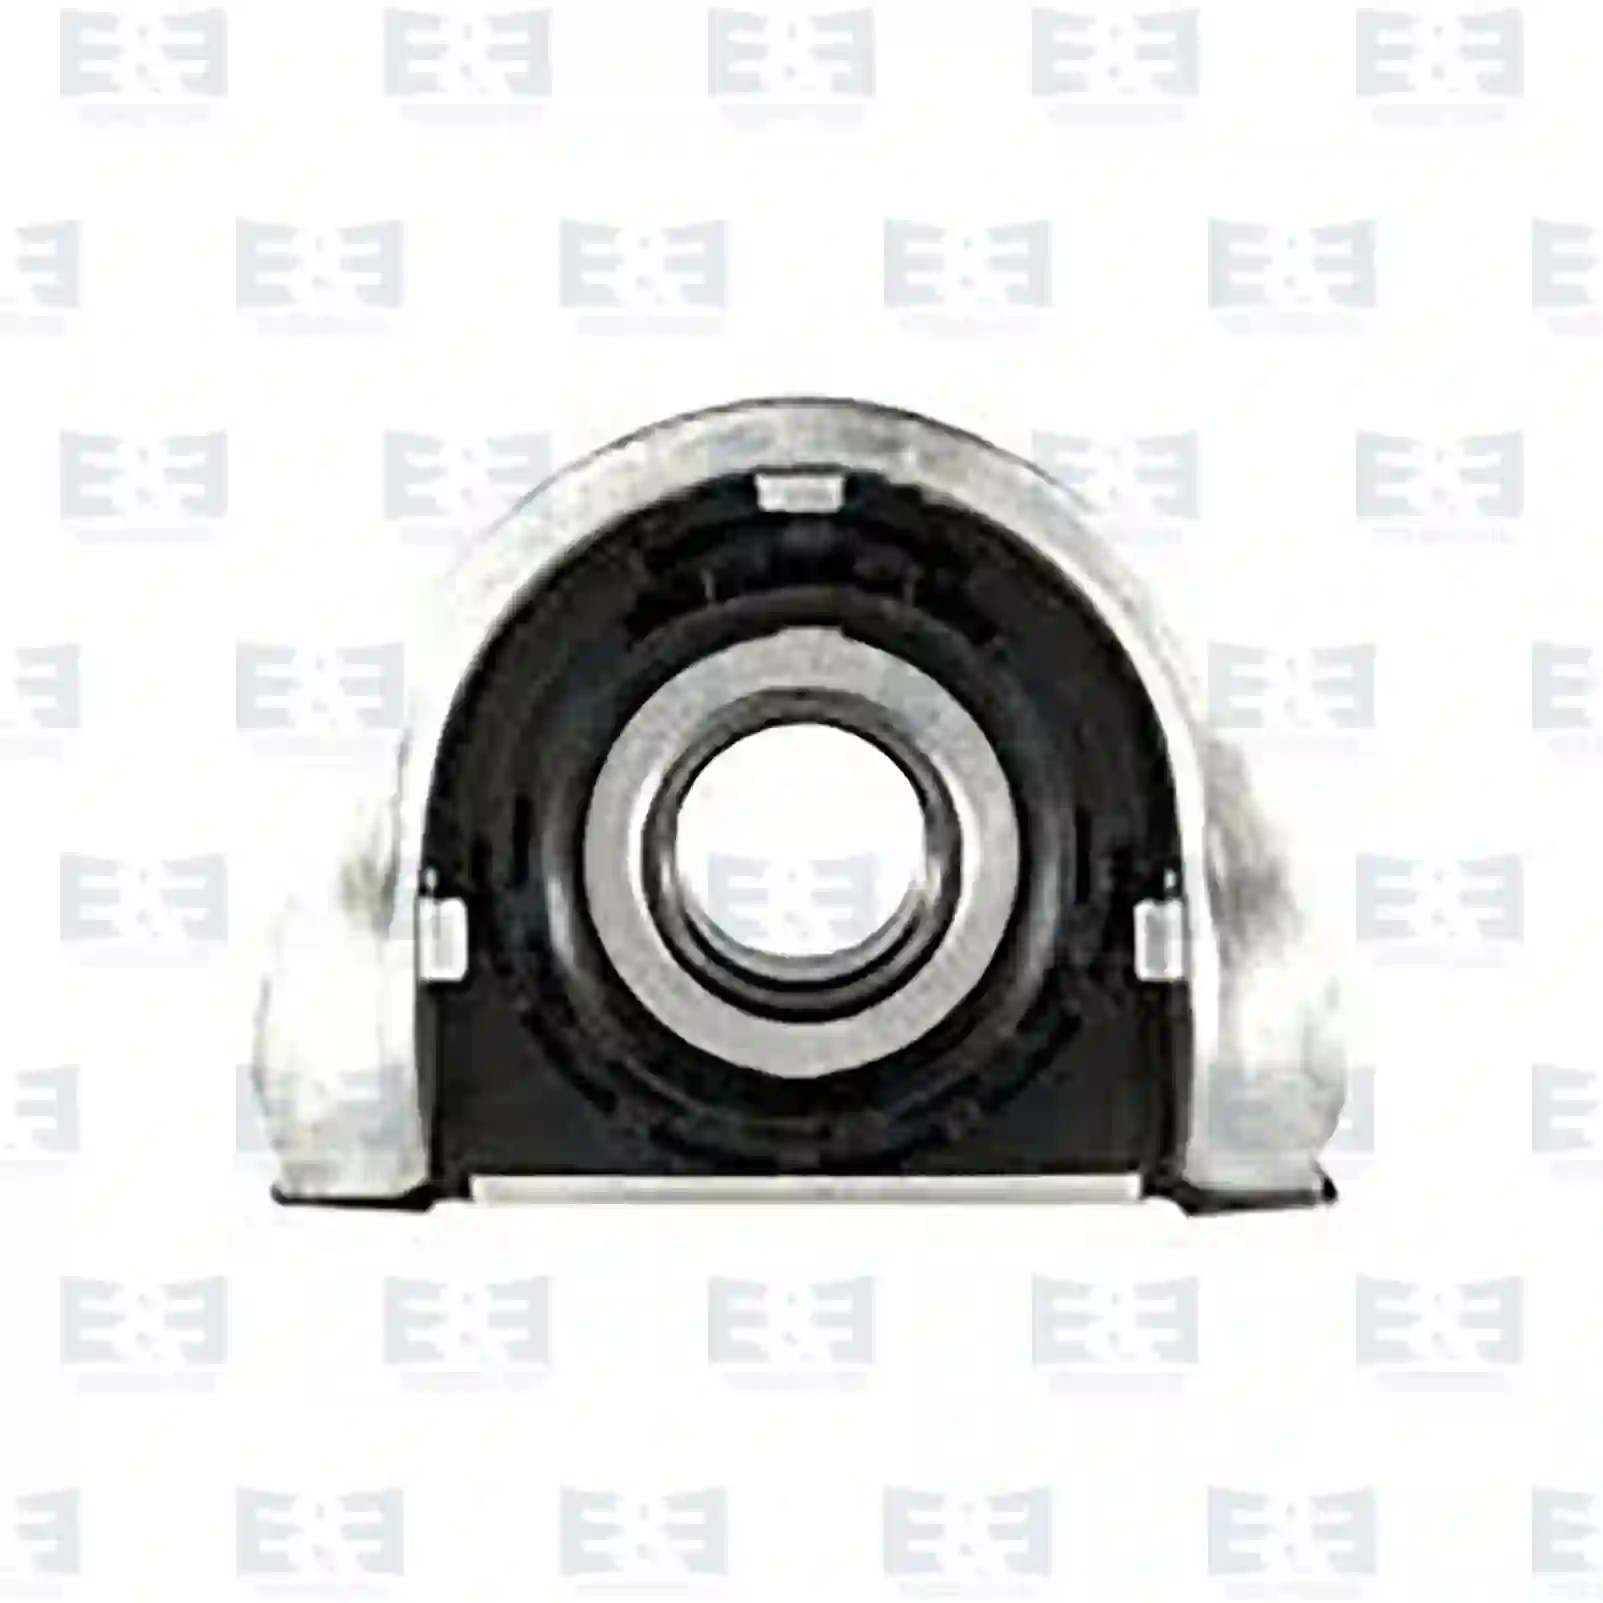 Support Bearing Center bearing, EE No 2E2276960 ,  oem no:8127224 E&E Truck Spare Parts | Truck Spare Parts, Auotomotive Spare Parts